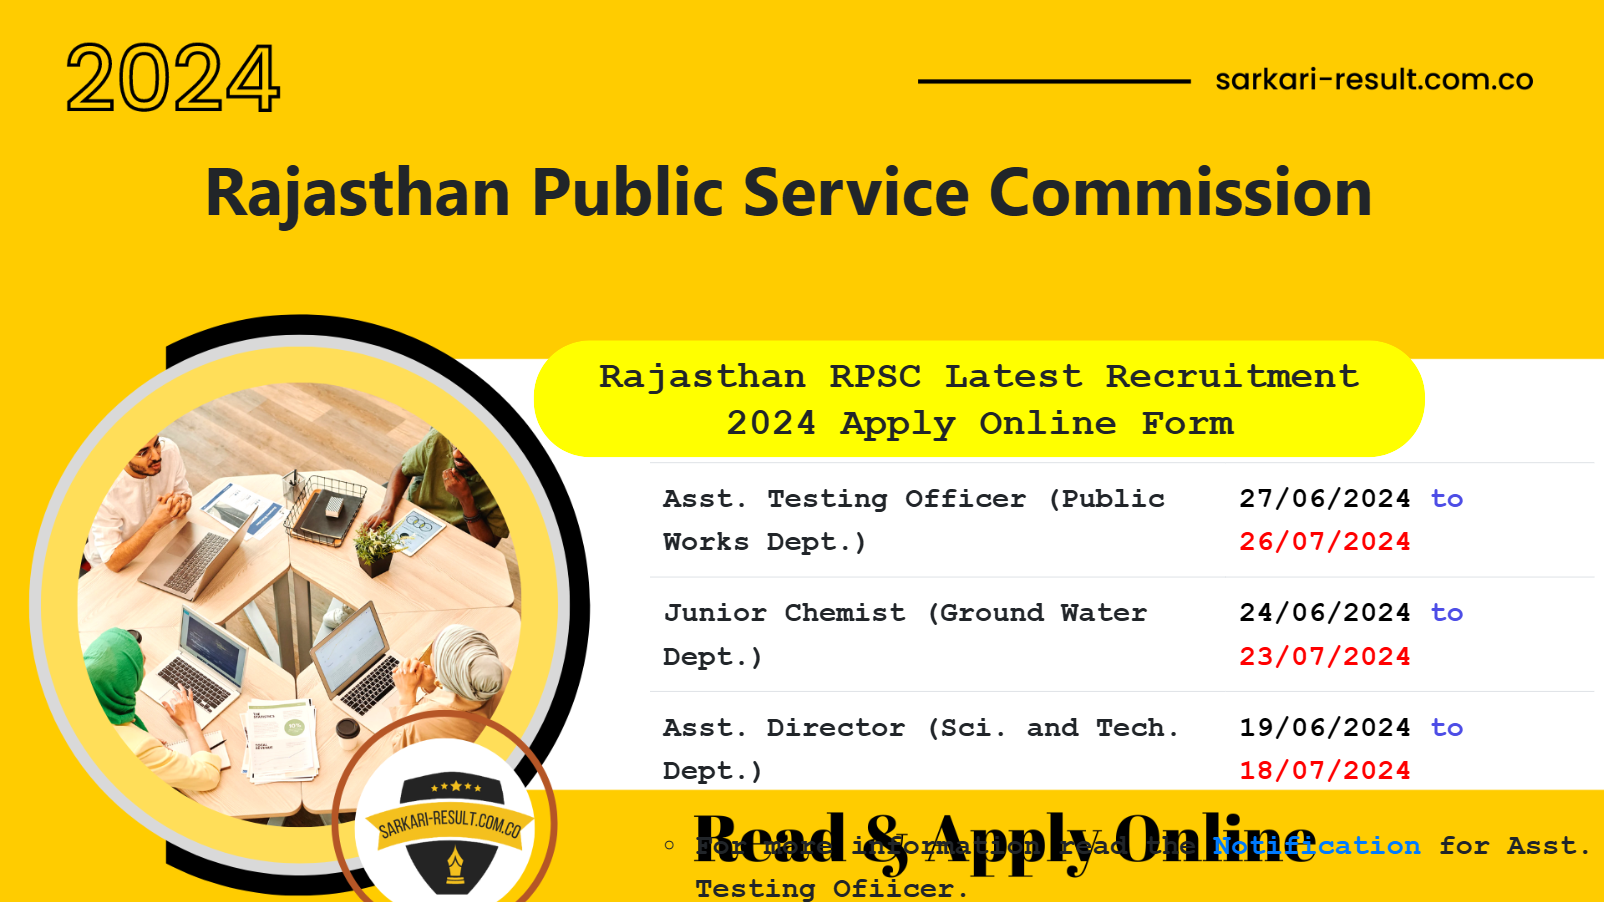 Rajasthan RPSC Latest Recruitment 2024 Online Form Through SSO ID